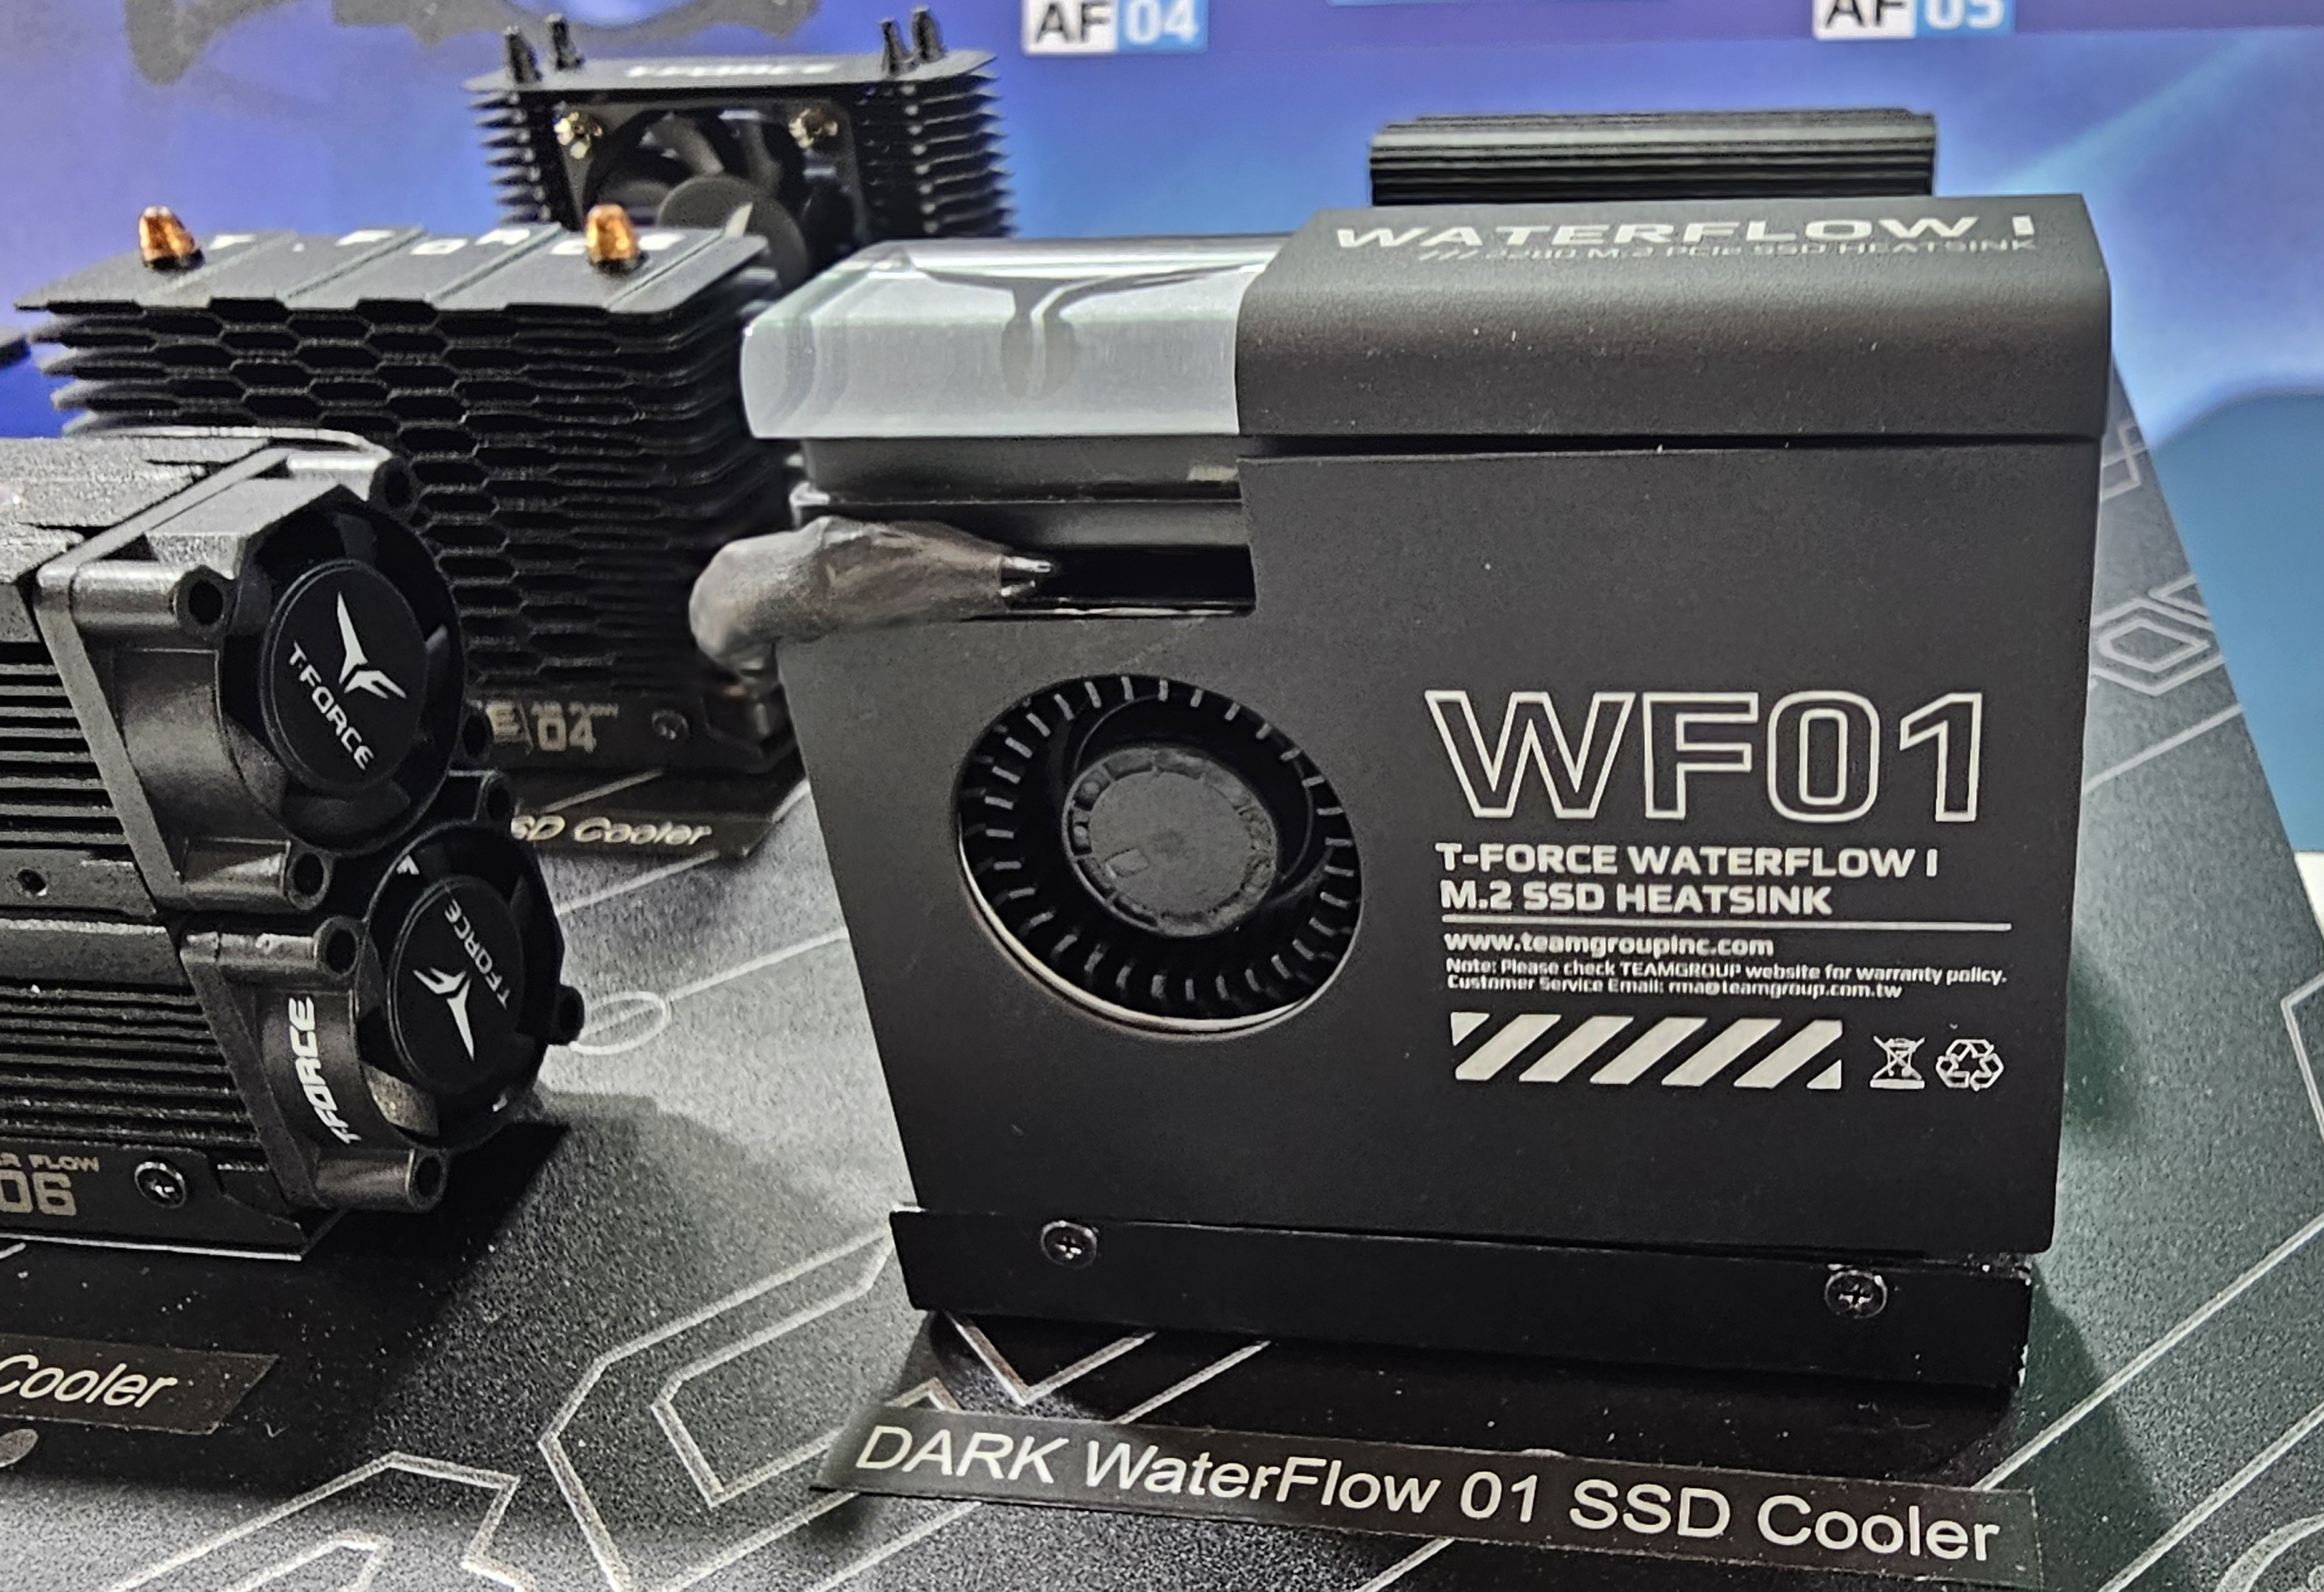 Waterflow 01 featured in Computex 2024